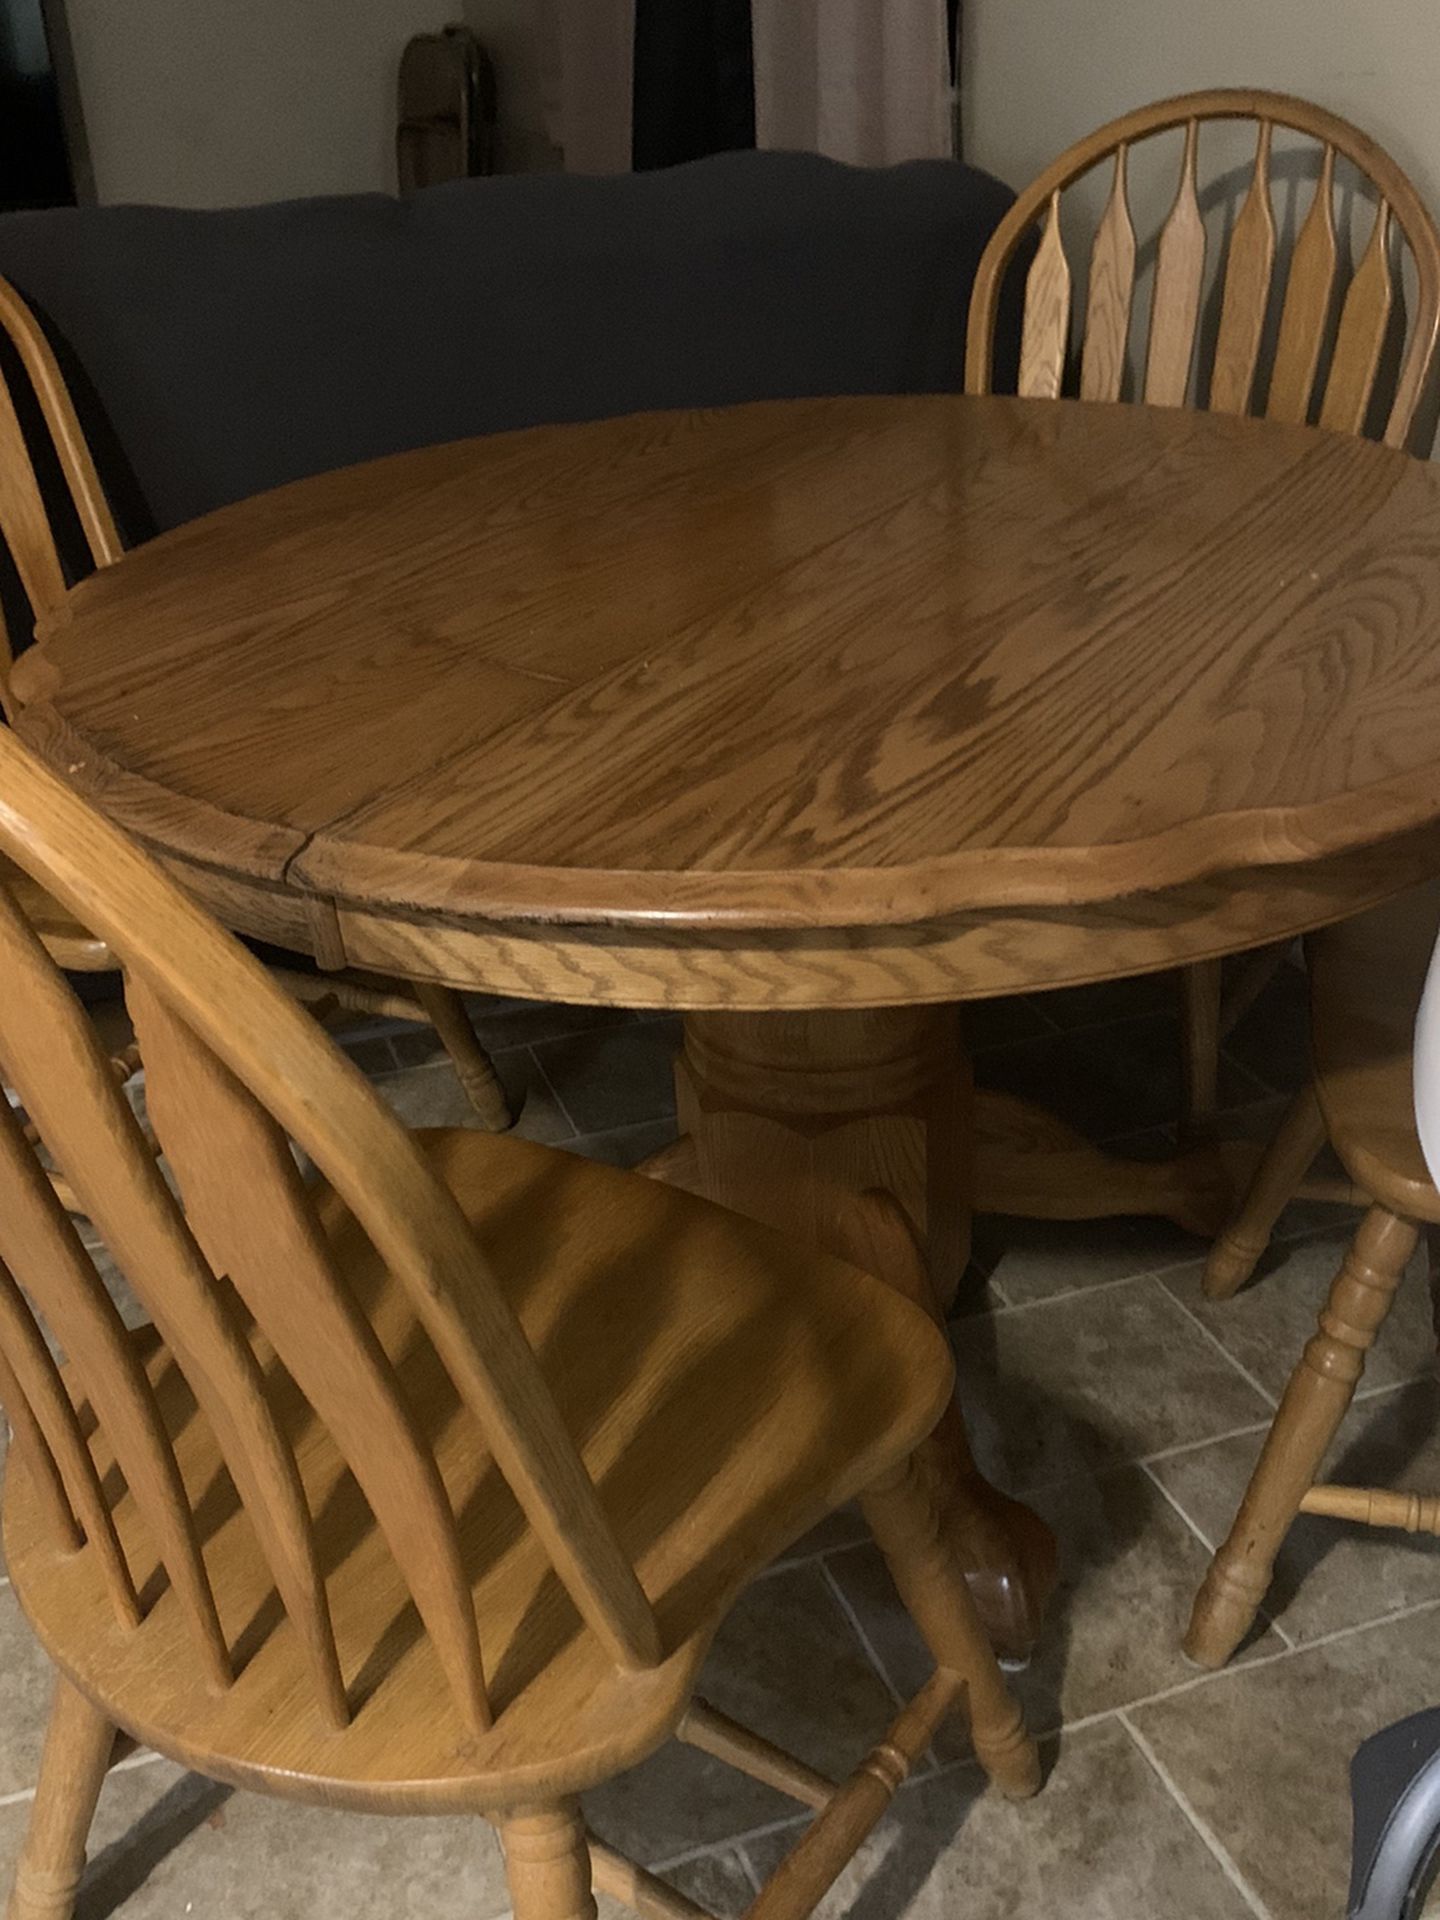 Table 4 Chairs But Has Leaf That Is Not Shown